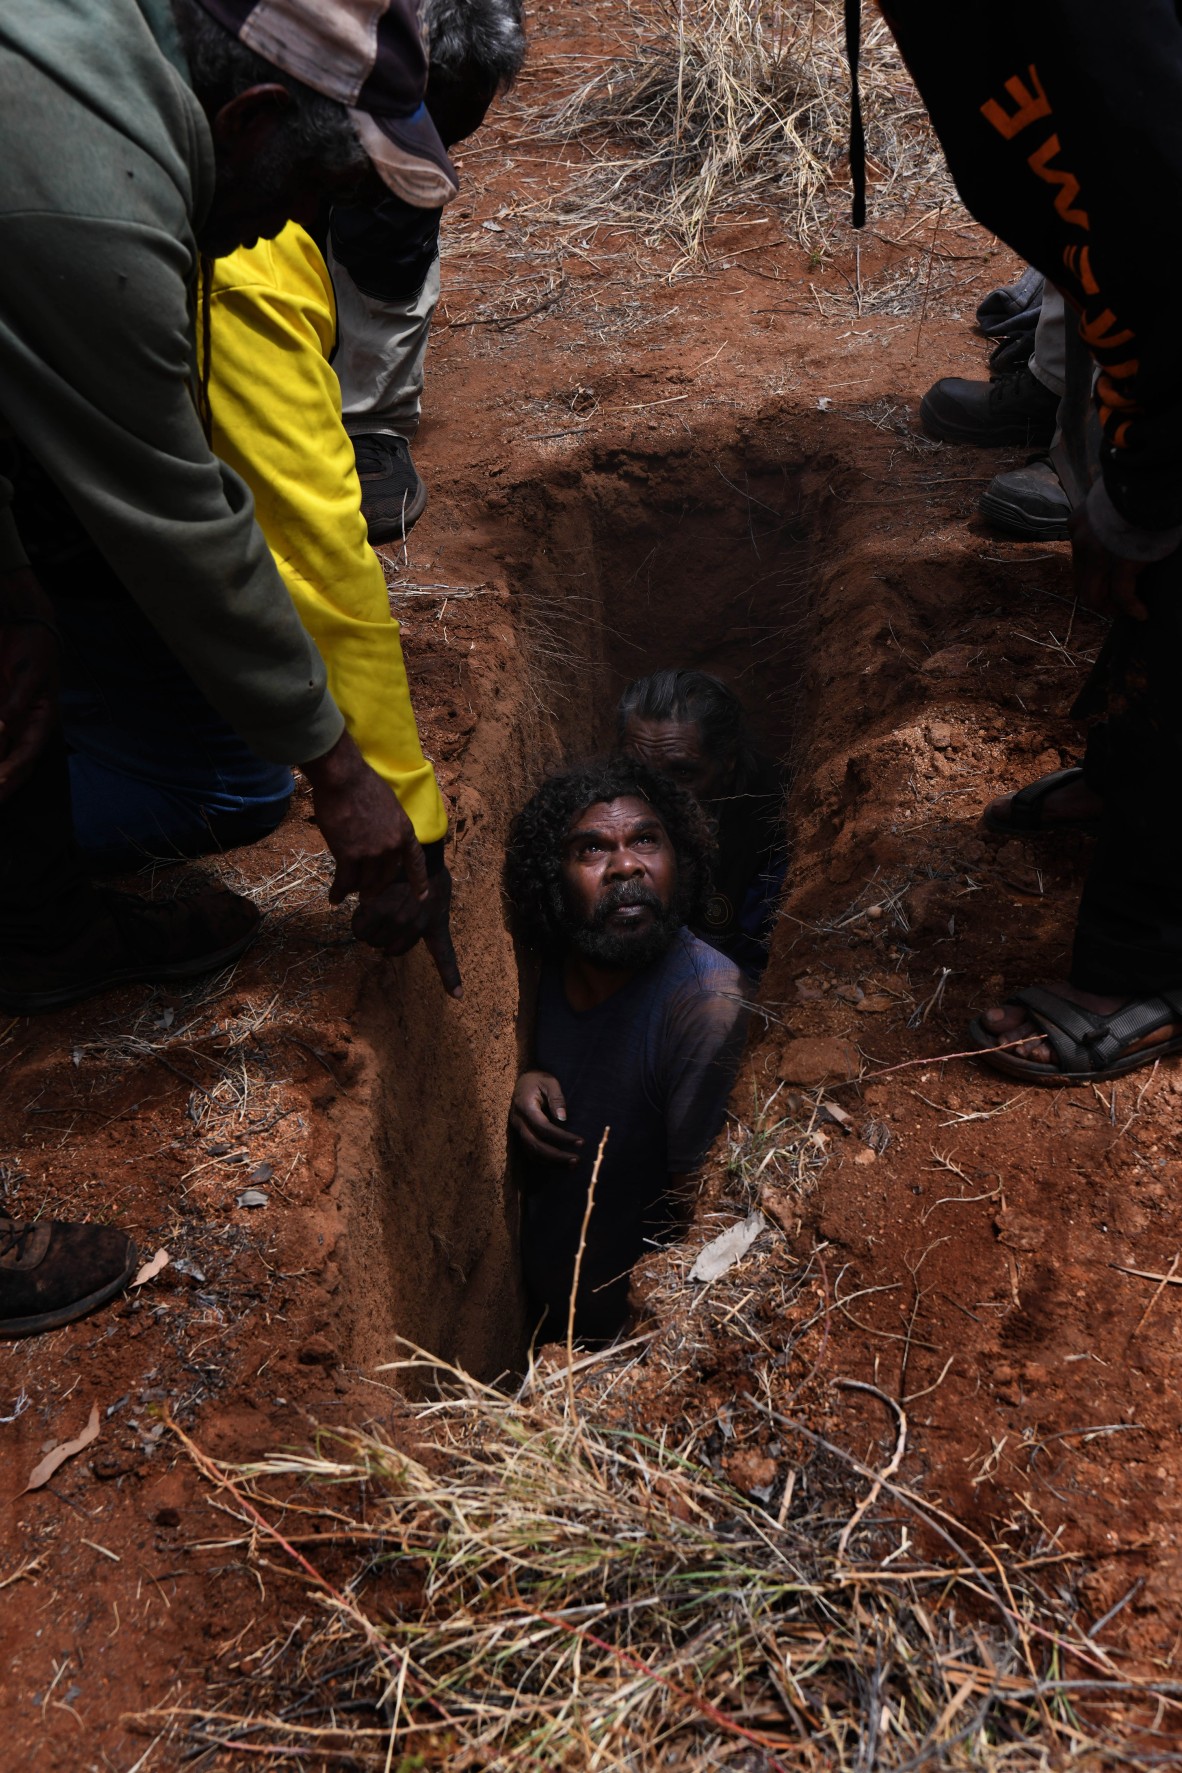 A photo of an Aboriginal man in a grave preparing for a burial